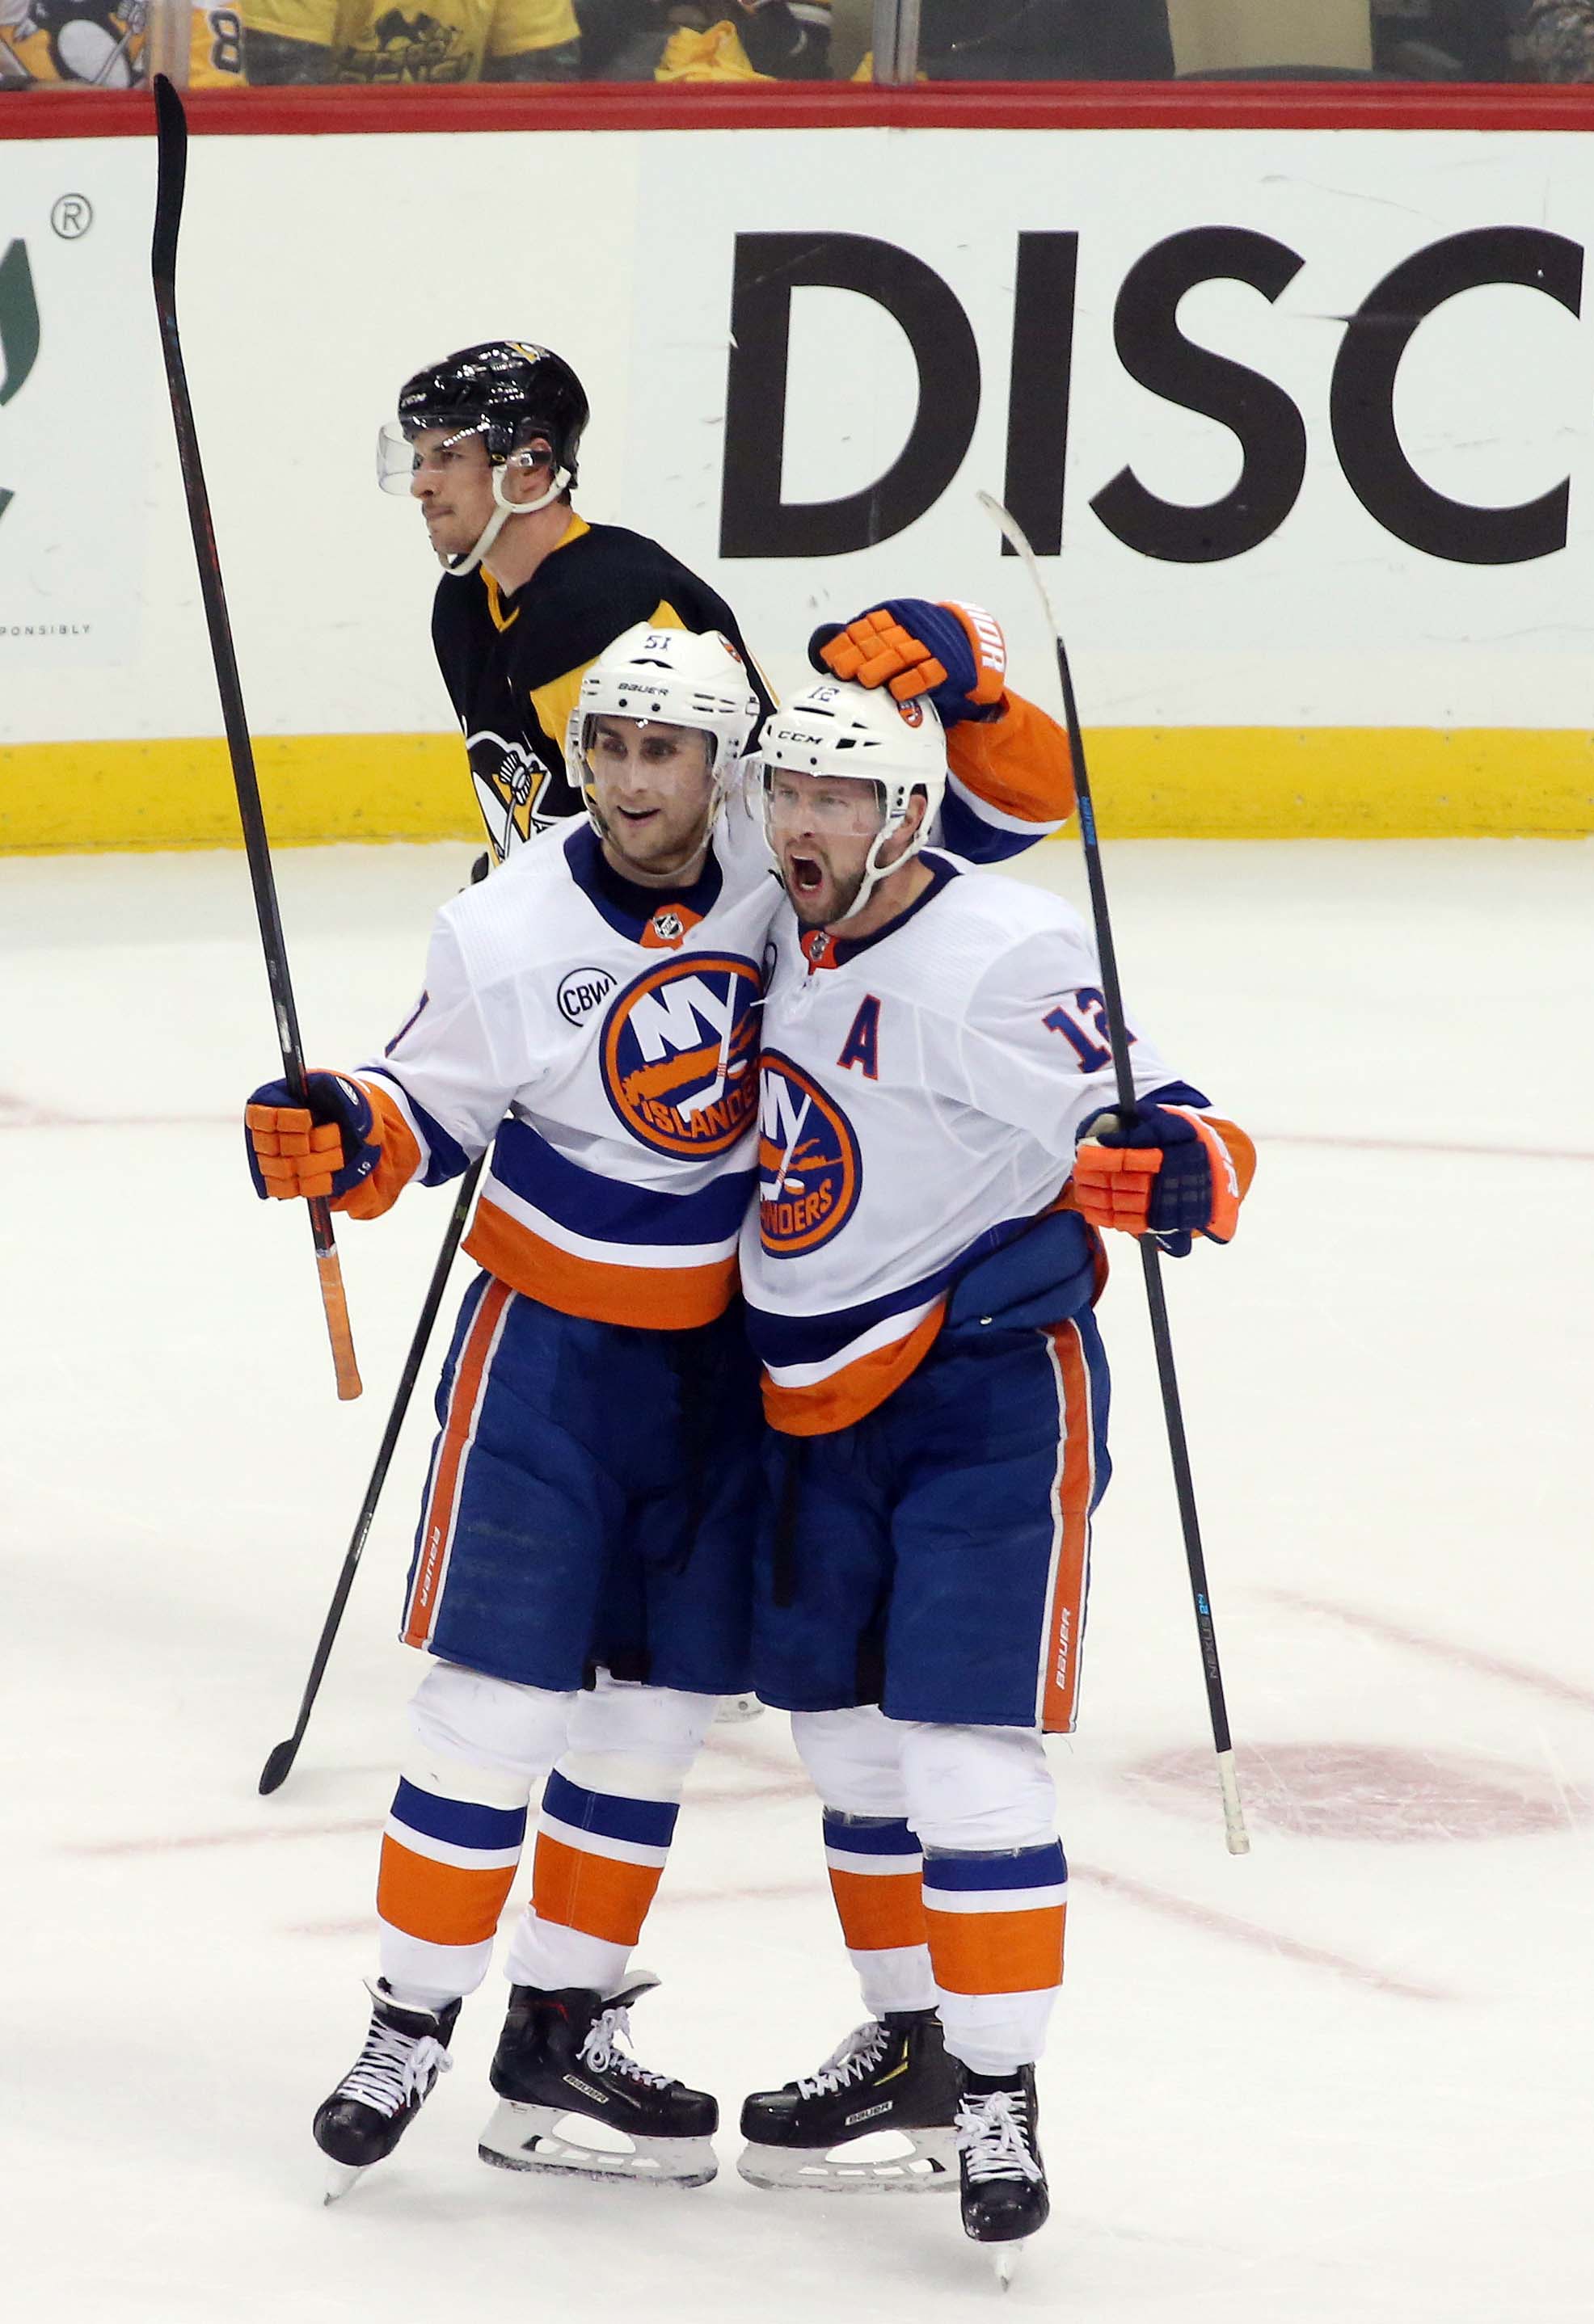 NHL: Stanley Cup Playoffs-New York Islanders at Pittsburgh Penguins